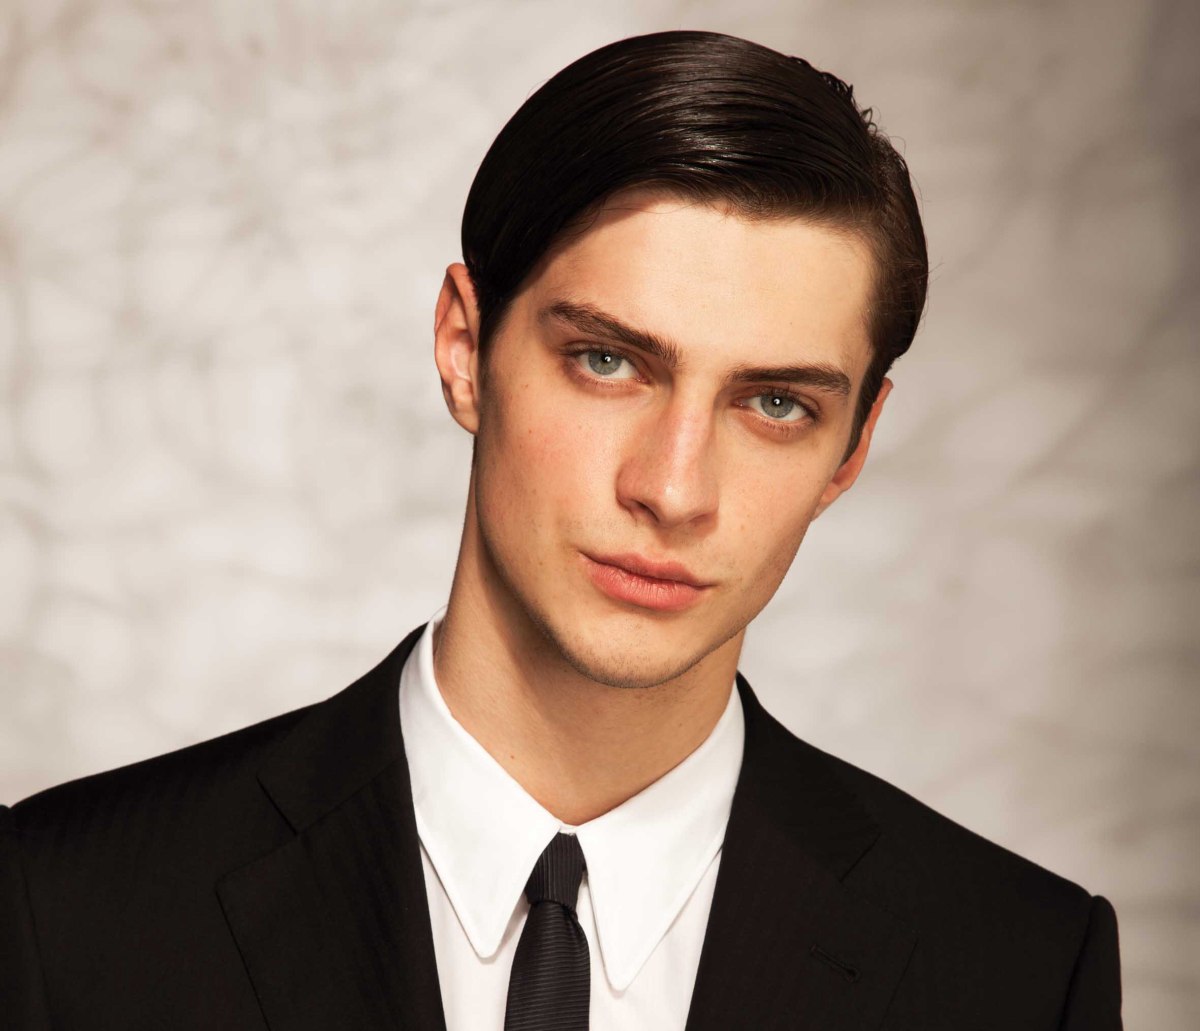 Gel Hairstyle Boy / The Best Haircuts for Boys - Just in Time for Back